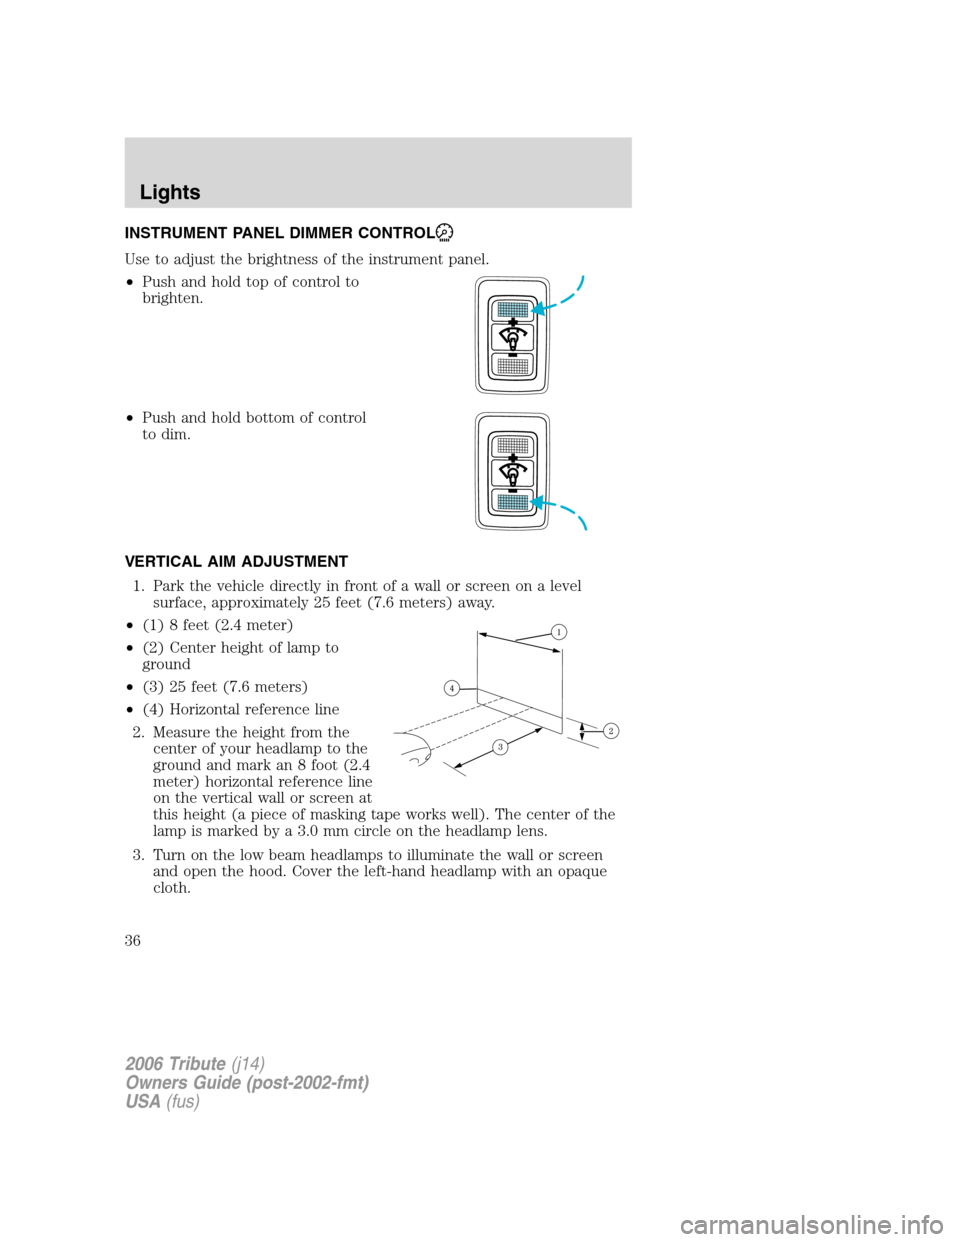 MAZDA MODEL TRIBUTE 2006   (in English) Owners Guide INSTRUMENT PANEL DIMMER CONTROL
Use to adjust the brightness of the instrument panel.
•Push and hold top of control to
brighten.
•Push and hold bottom of control
to dim.
VERTICAL AIM ADJUSTMENT
1.